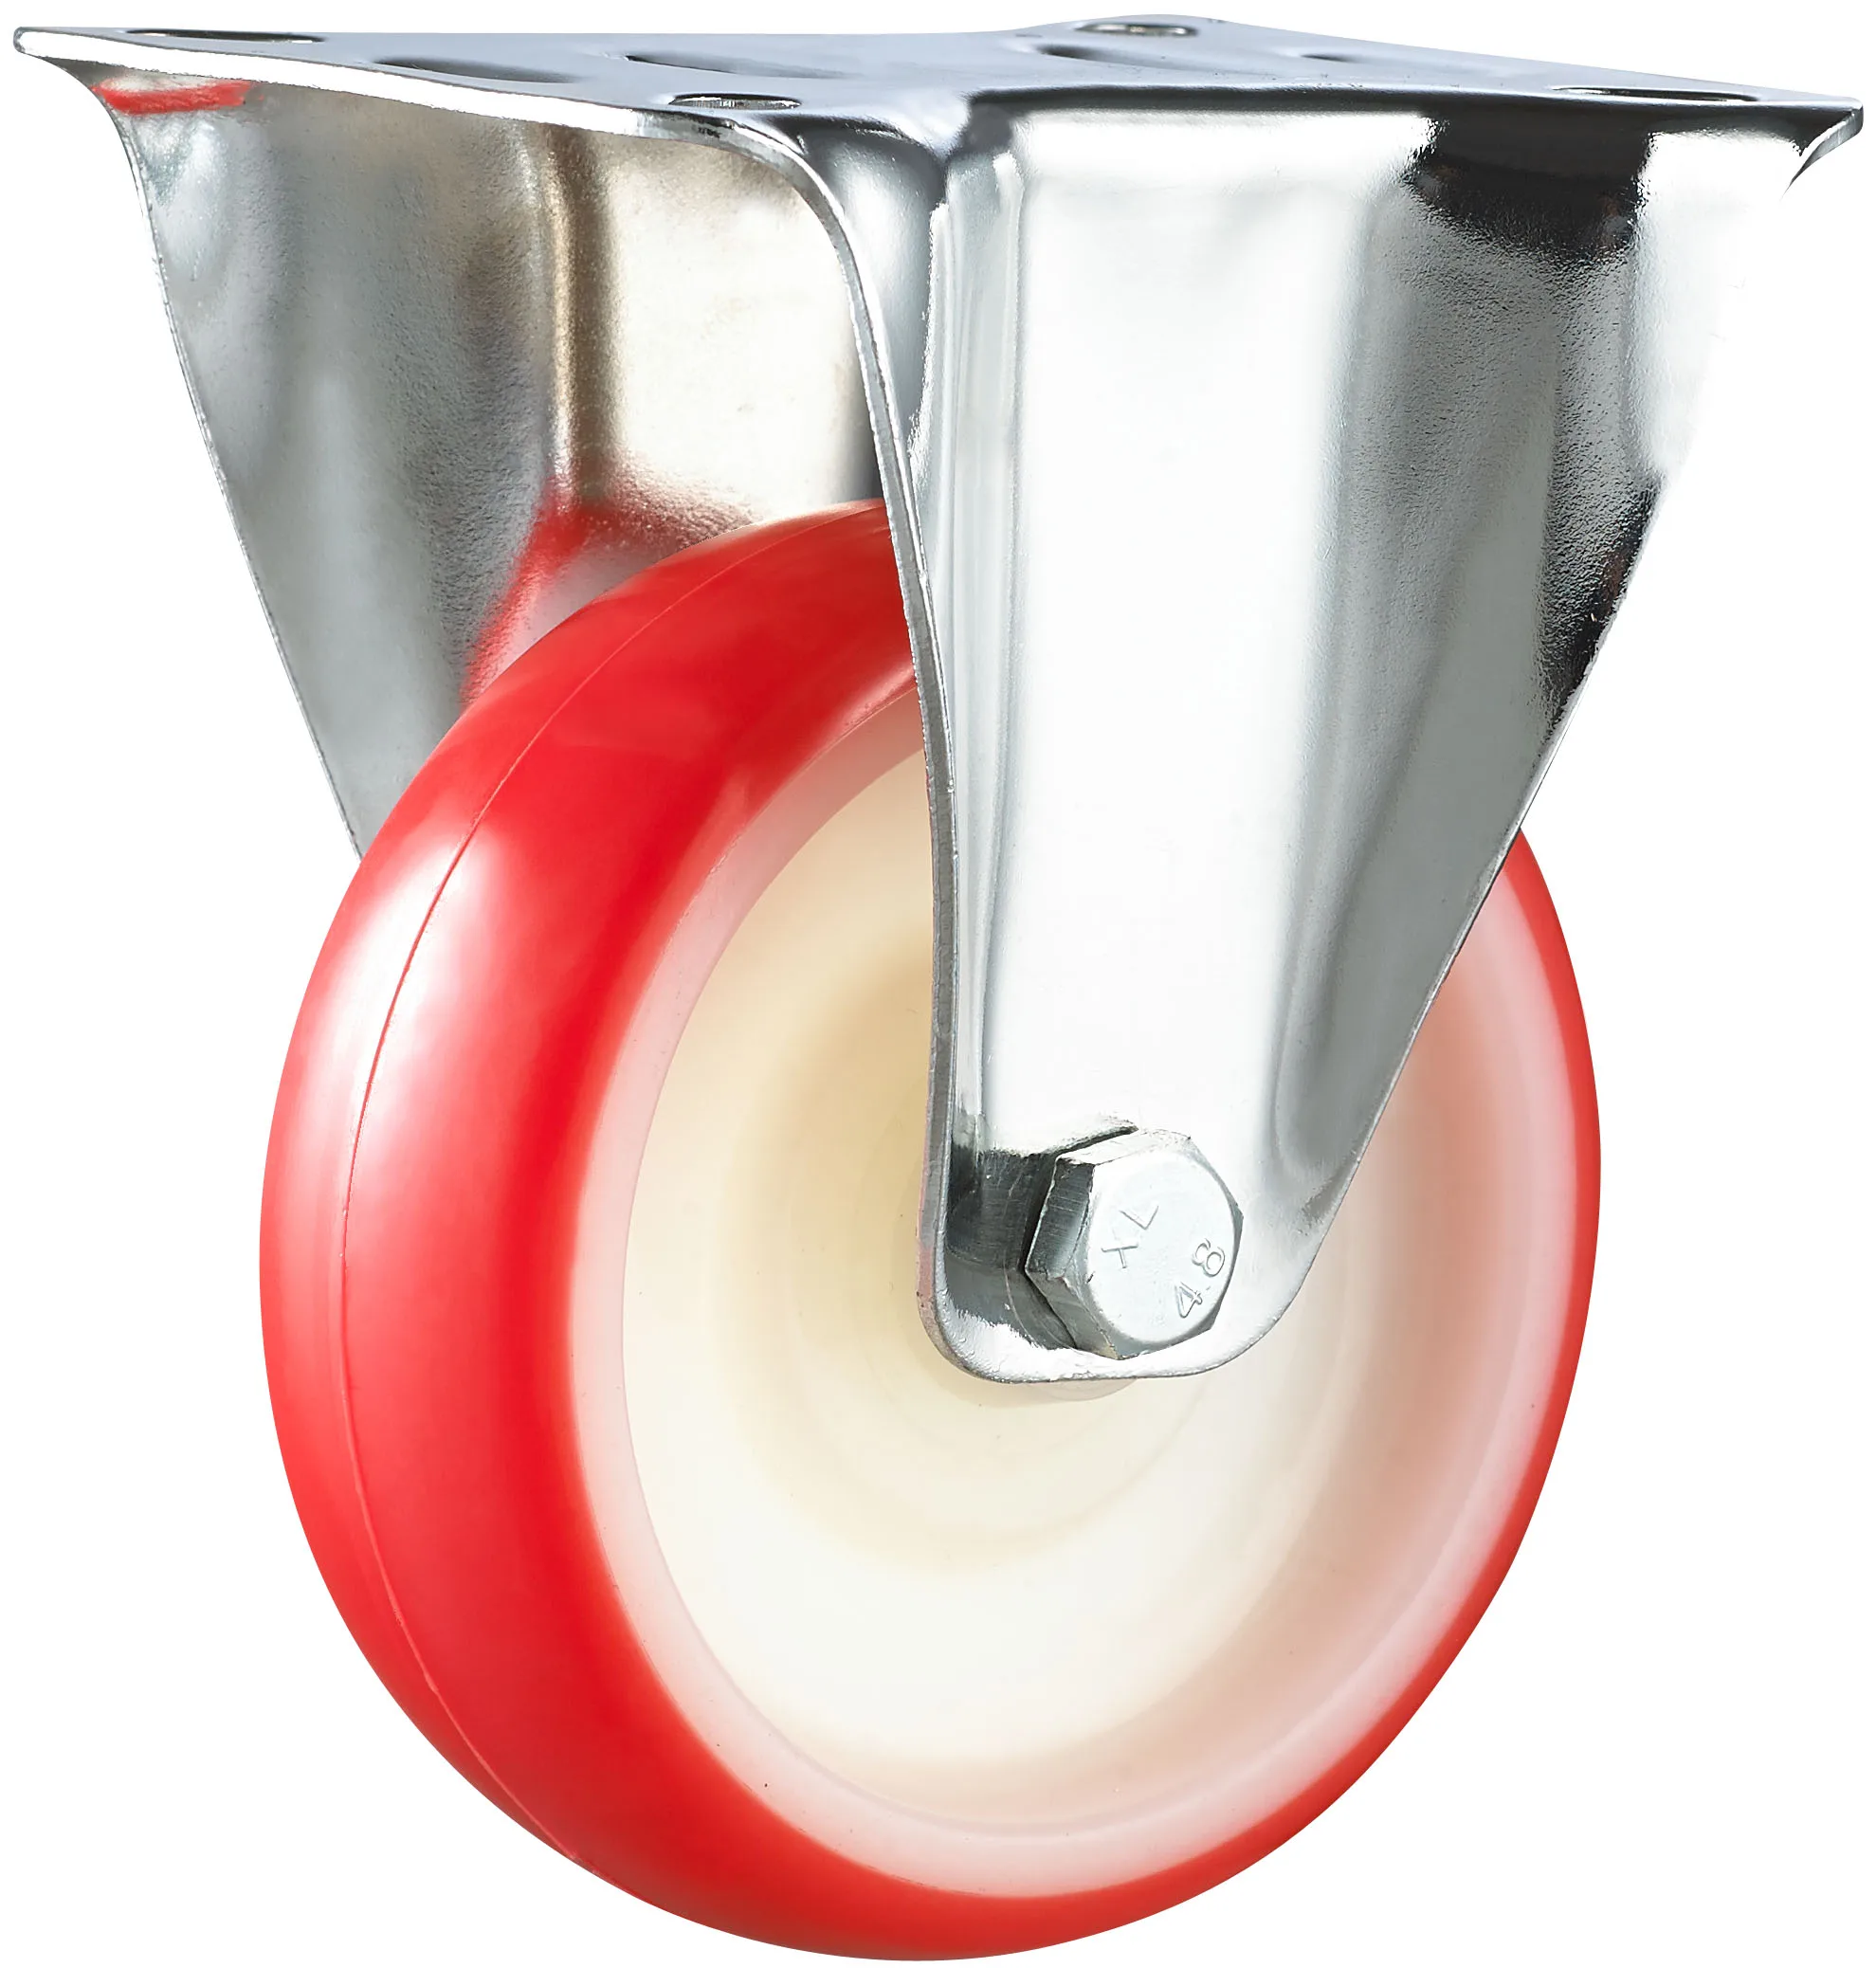 Factory sells Rotating transport equipment industrial caster wheel 4 inch Total lock brake Red PU casters